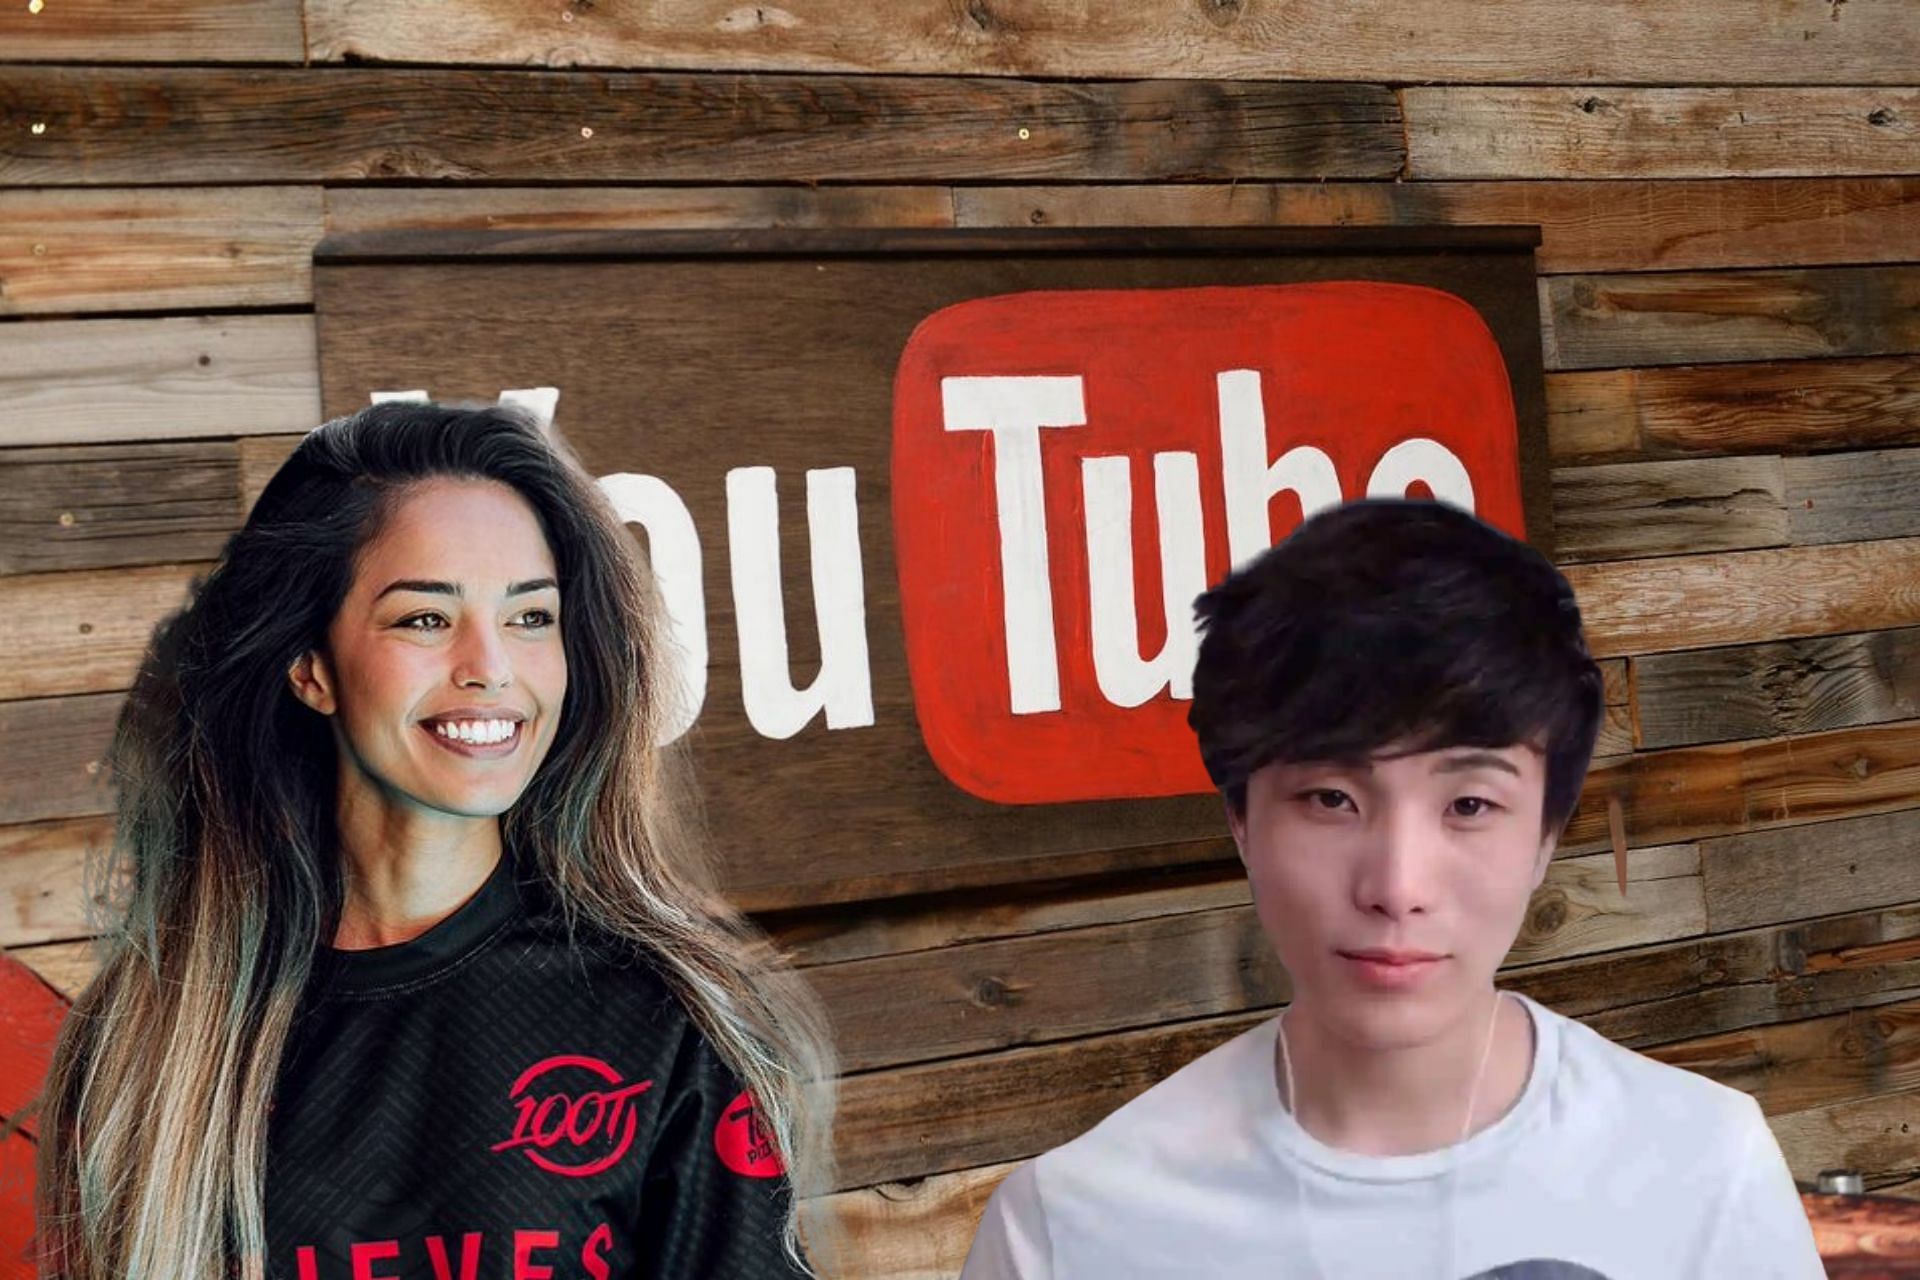 Queen of YouTube Valkyrae accuses Sykkuno of leaking information about &quot;Malibu&quot; (Images via Sportskeeda)